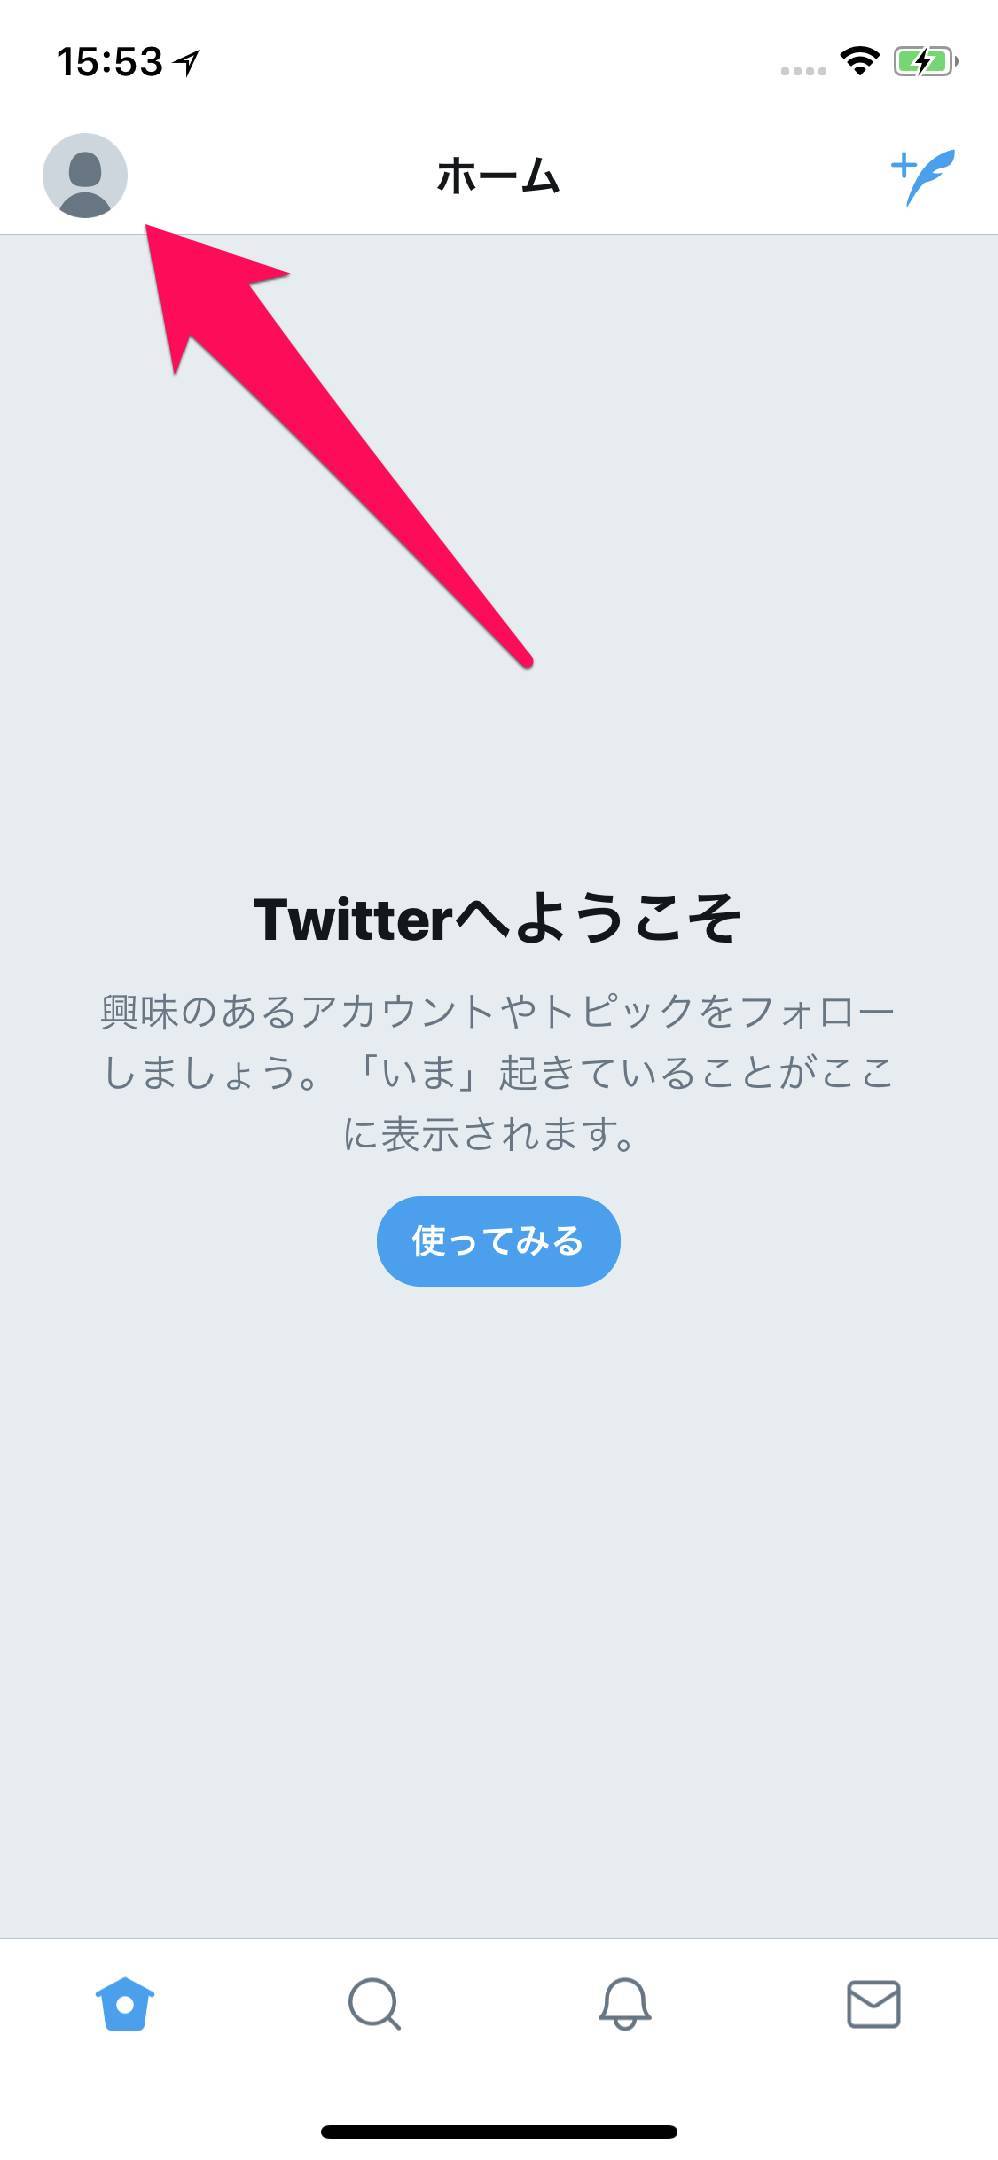 Twitter 新規アカウント作成方法 初心者ガイド Iphone Android Pc Appliv Topics